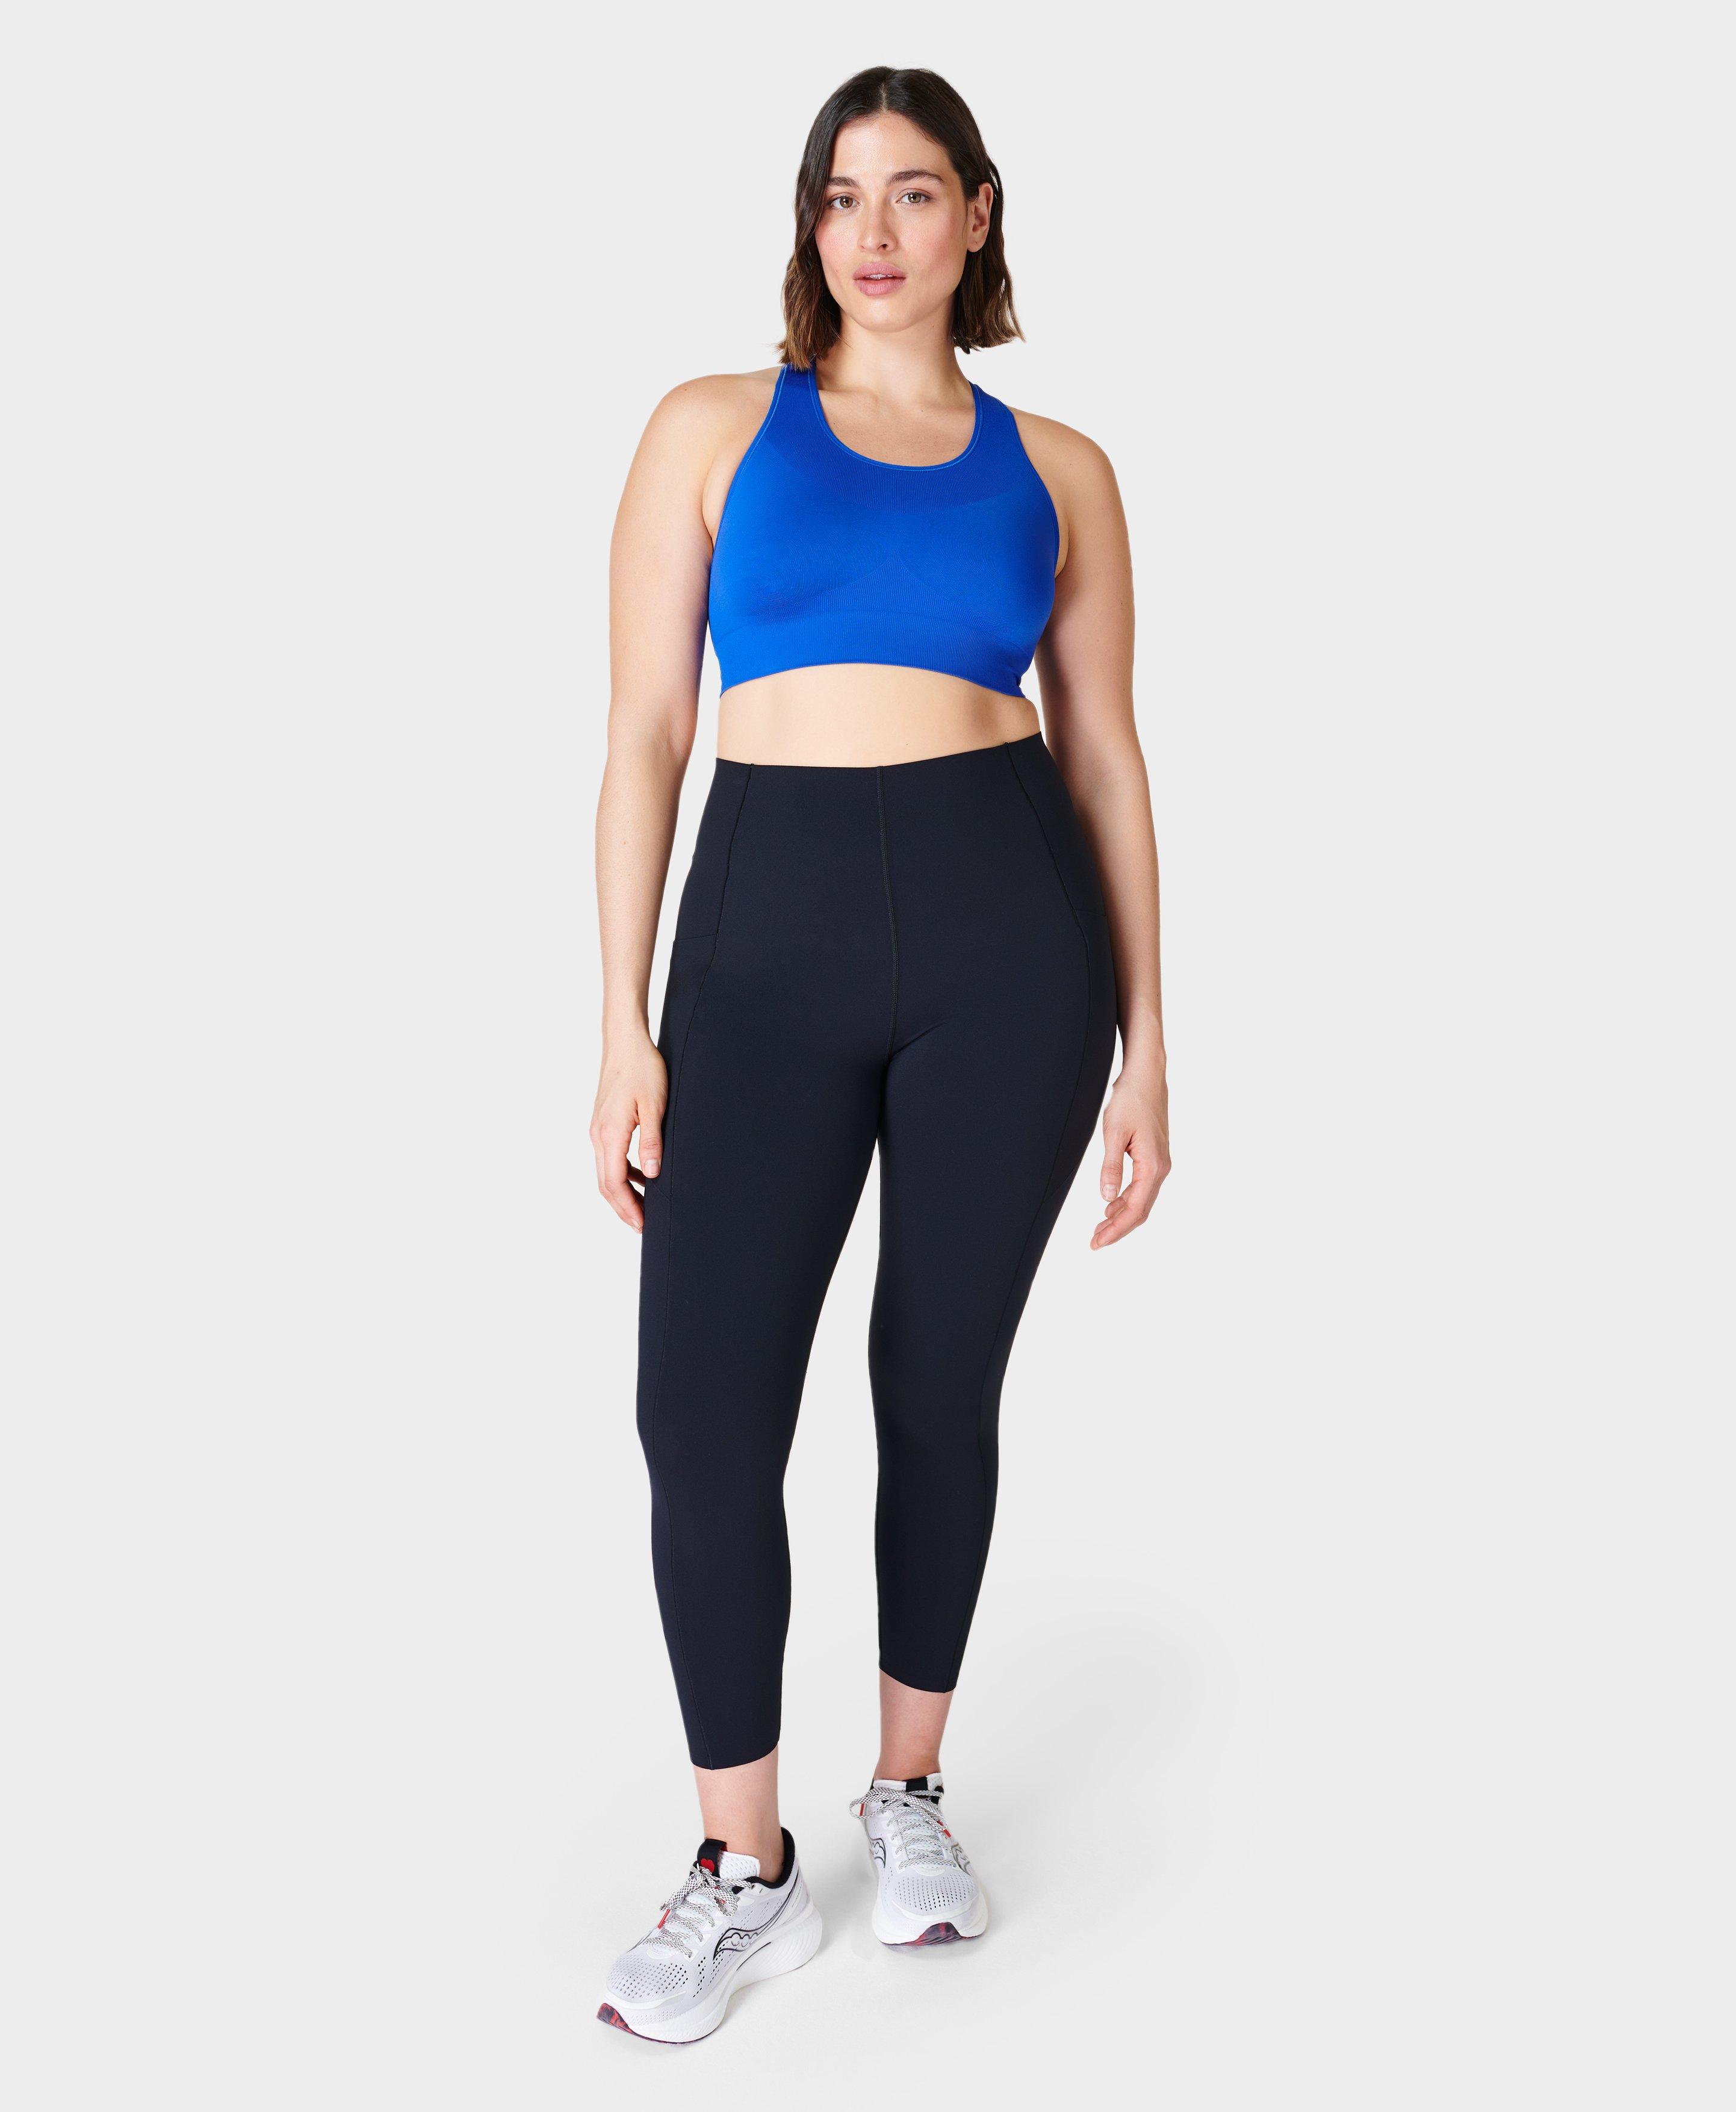 Sweaty Betty High Shine High Waisted 7/8 Leggings Black Size XS - $59 New  With Tags - From Dori